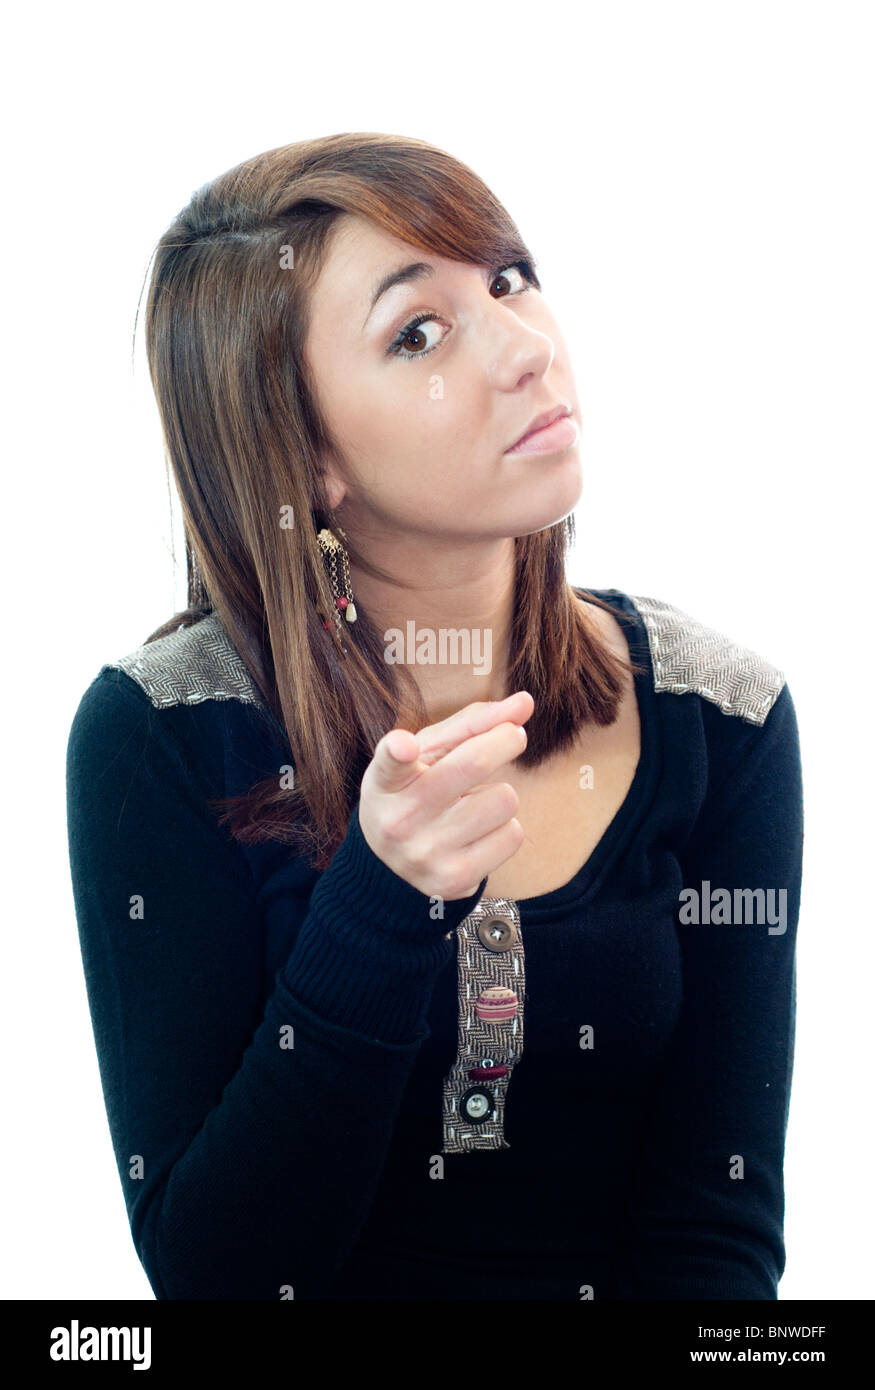 High key image against a white background of a pretty, 16 year old girl pointing her finger with authority and warning. Concepts. Stock Photo